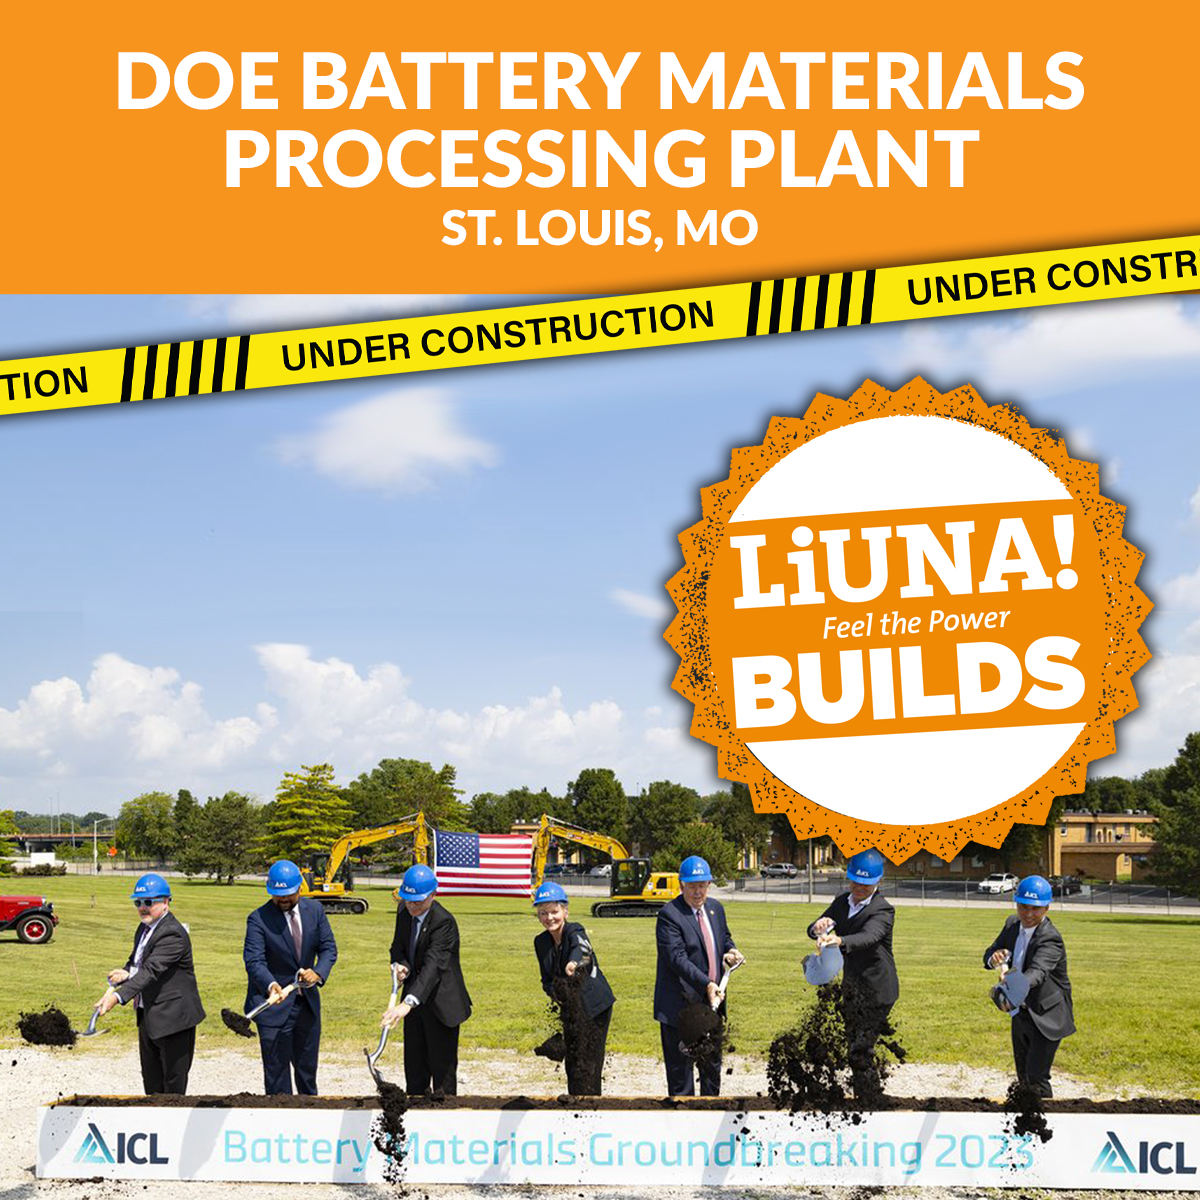 From coast to coast, #LIUNABuilds the foundation of our clean energy tomorrow! Check out the DOE Battery Materials Processing Plant in St. Louis, MO—just one of the many projects driving us towards a brighter, greener future! #CleanEnergy